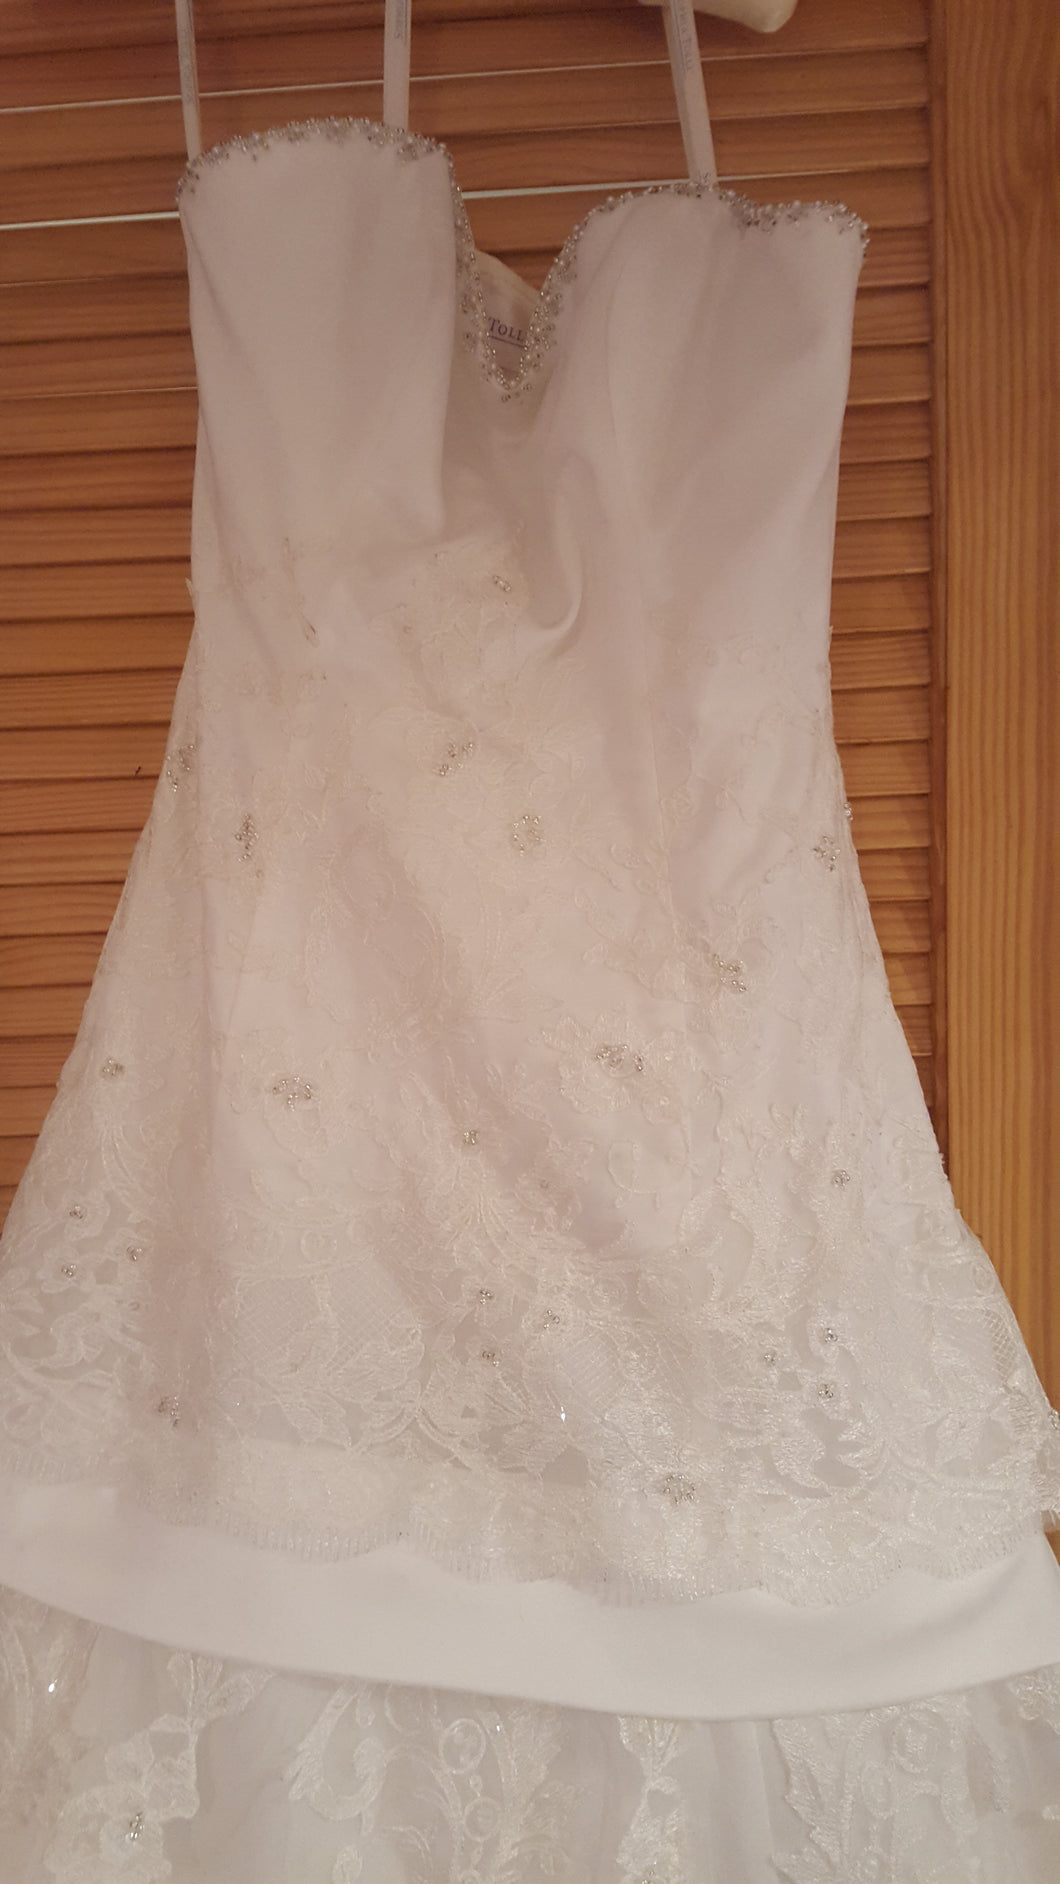 Sophia Tolli 'Lace And Elegance' size 10 new wedding dress front view on hanger